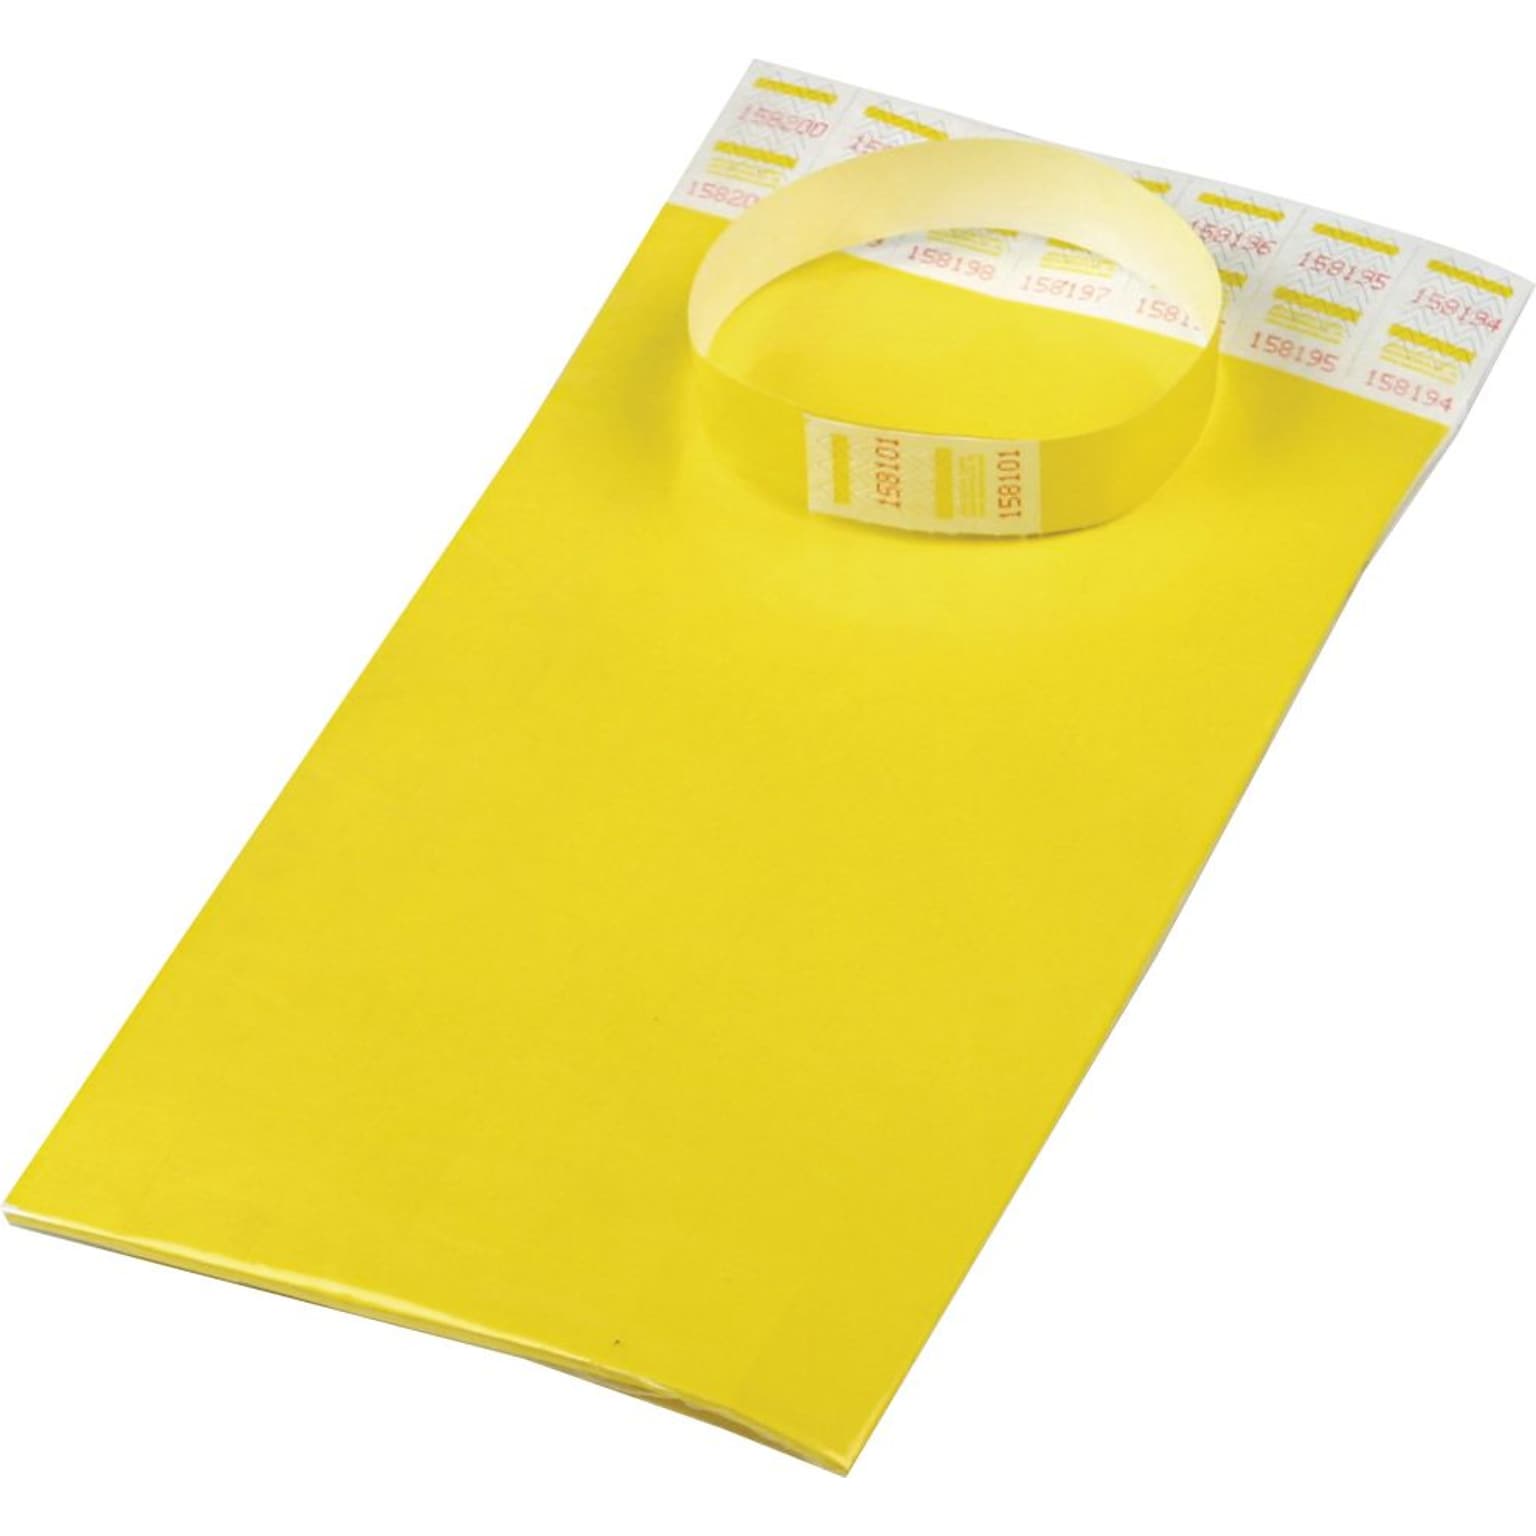 Advantus Sequentially Numbered Crowd Control Wristbands, Yellow, 100/Pack (AVT75444)